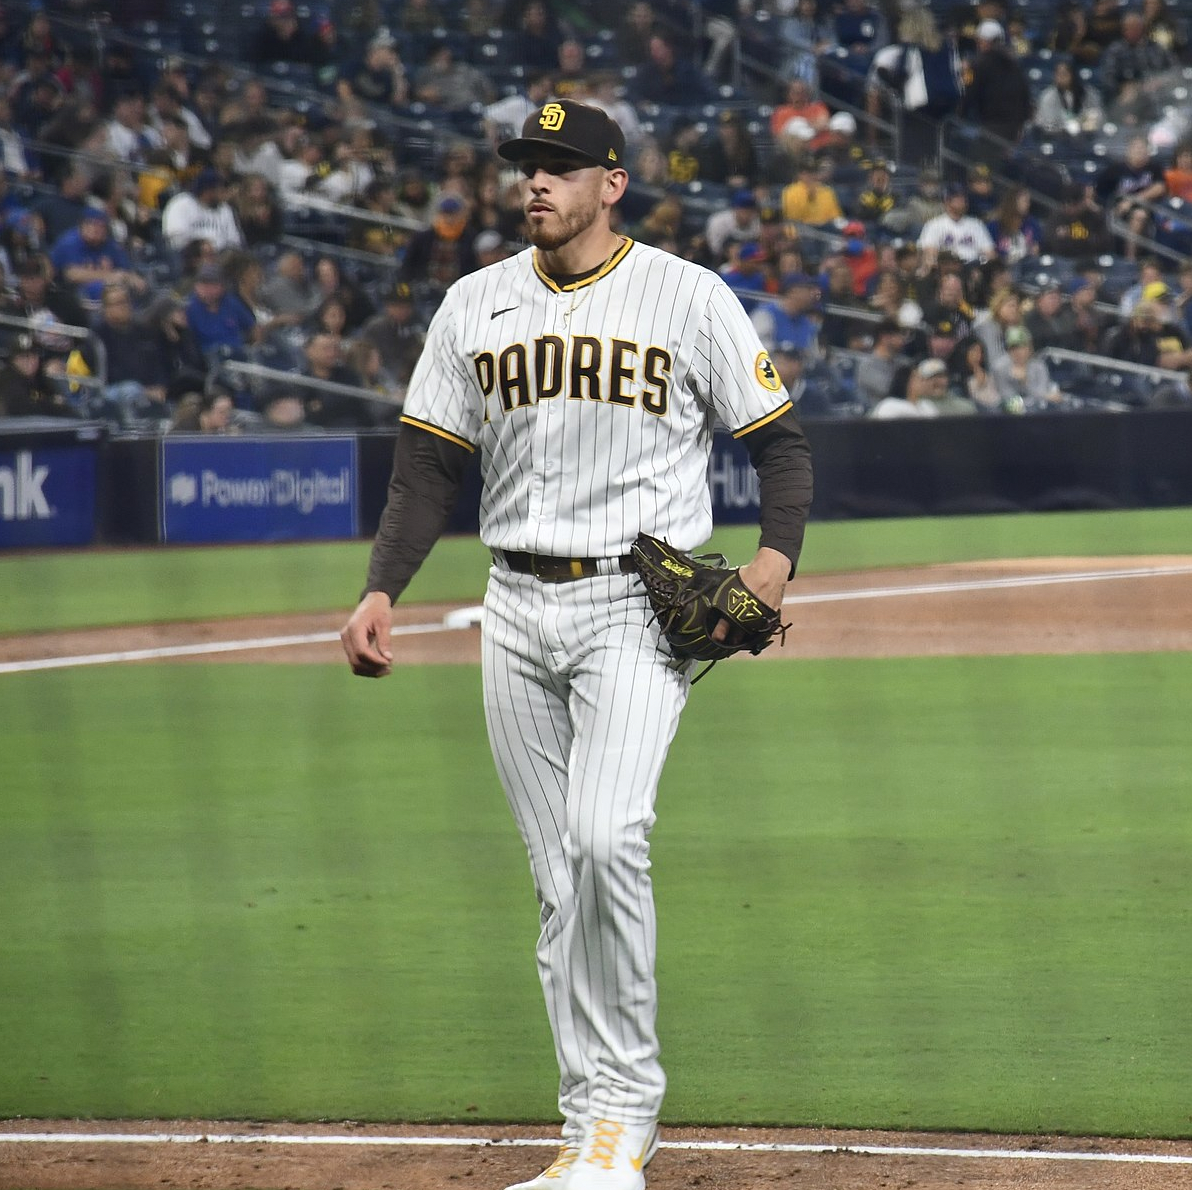 Four observations from the first quarter of the Padres season